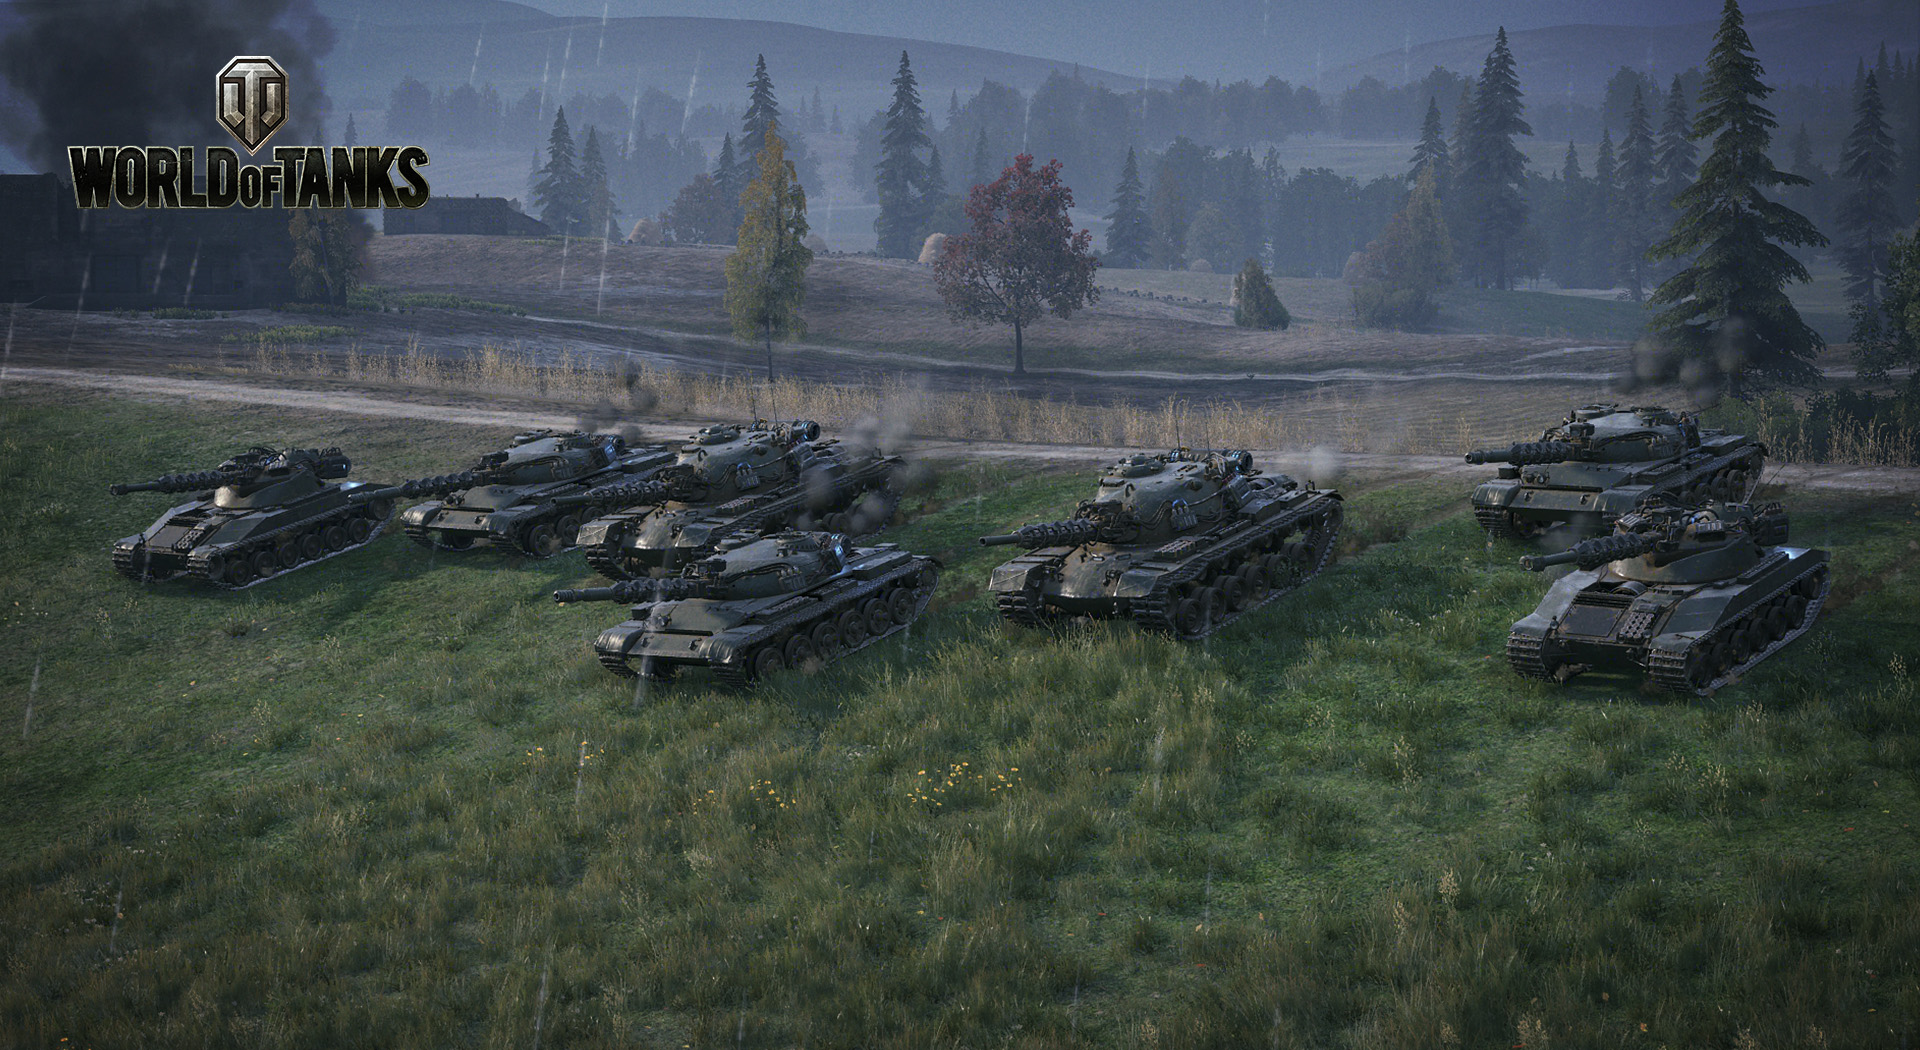 The ruthless Waffenträger returns to World of Tanks and 7 vs. 1 battles with valuable rewards for victory